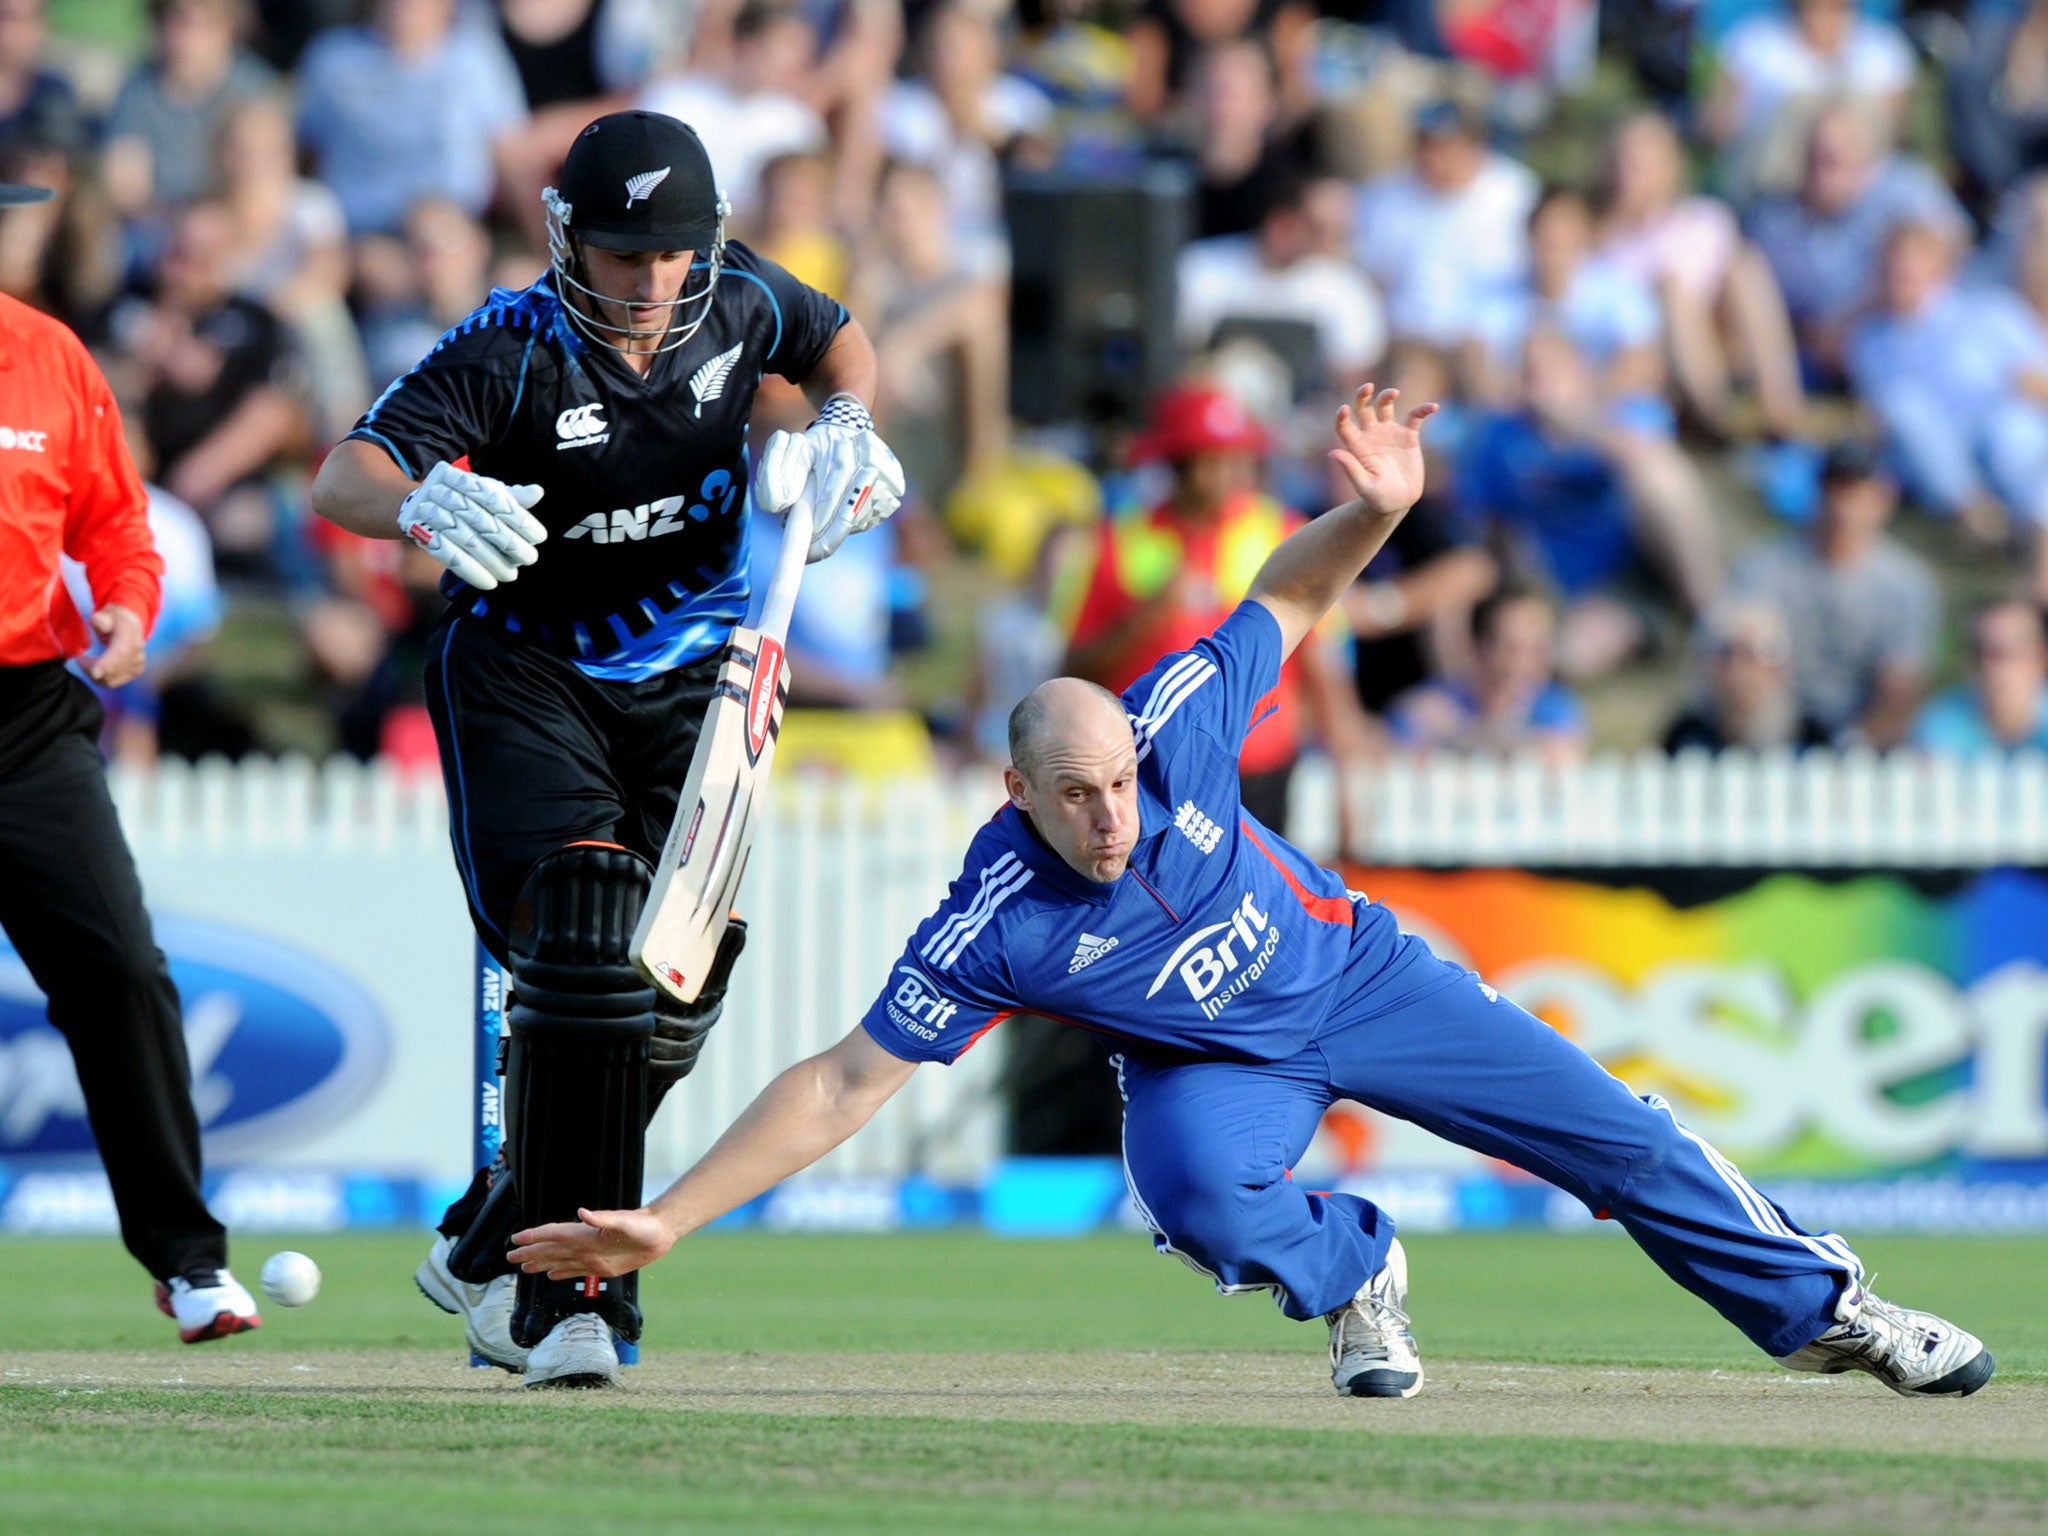 England's James Tredwell dives in front of New Zealand's Hamish Rutherfored